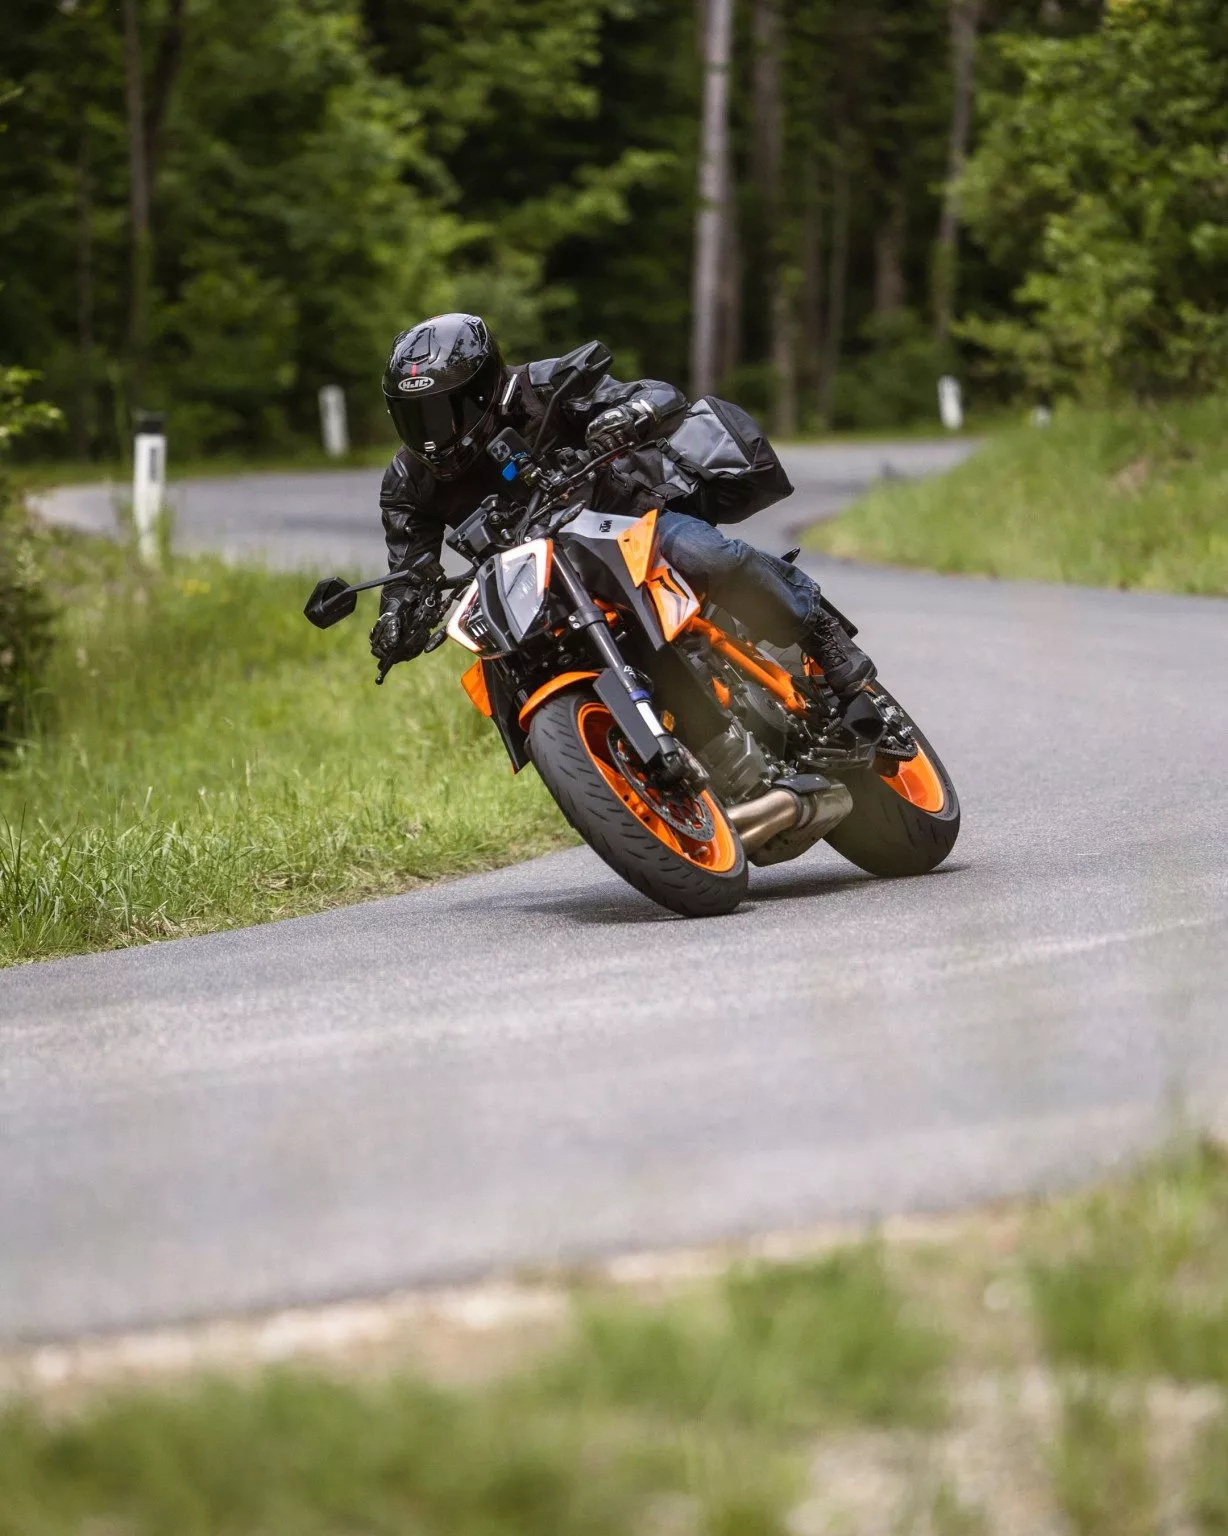 Motorcycling in the Black Forest